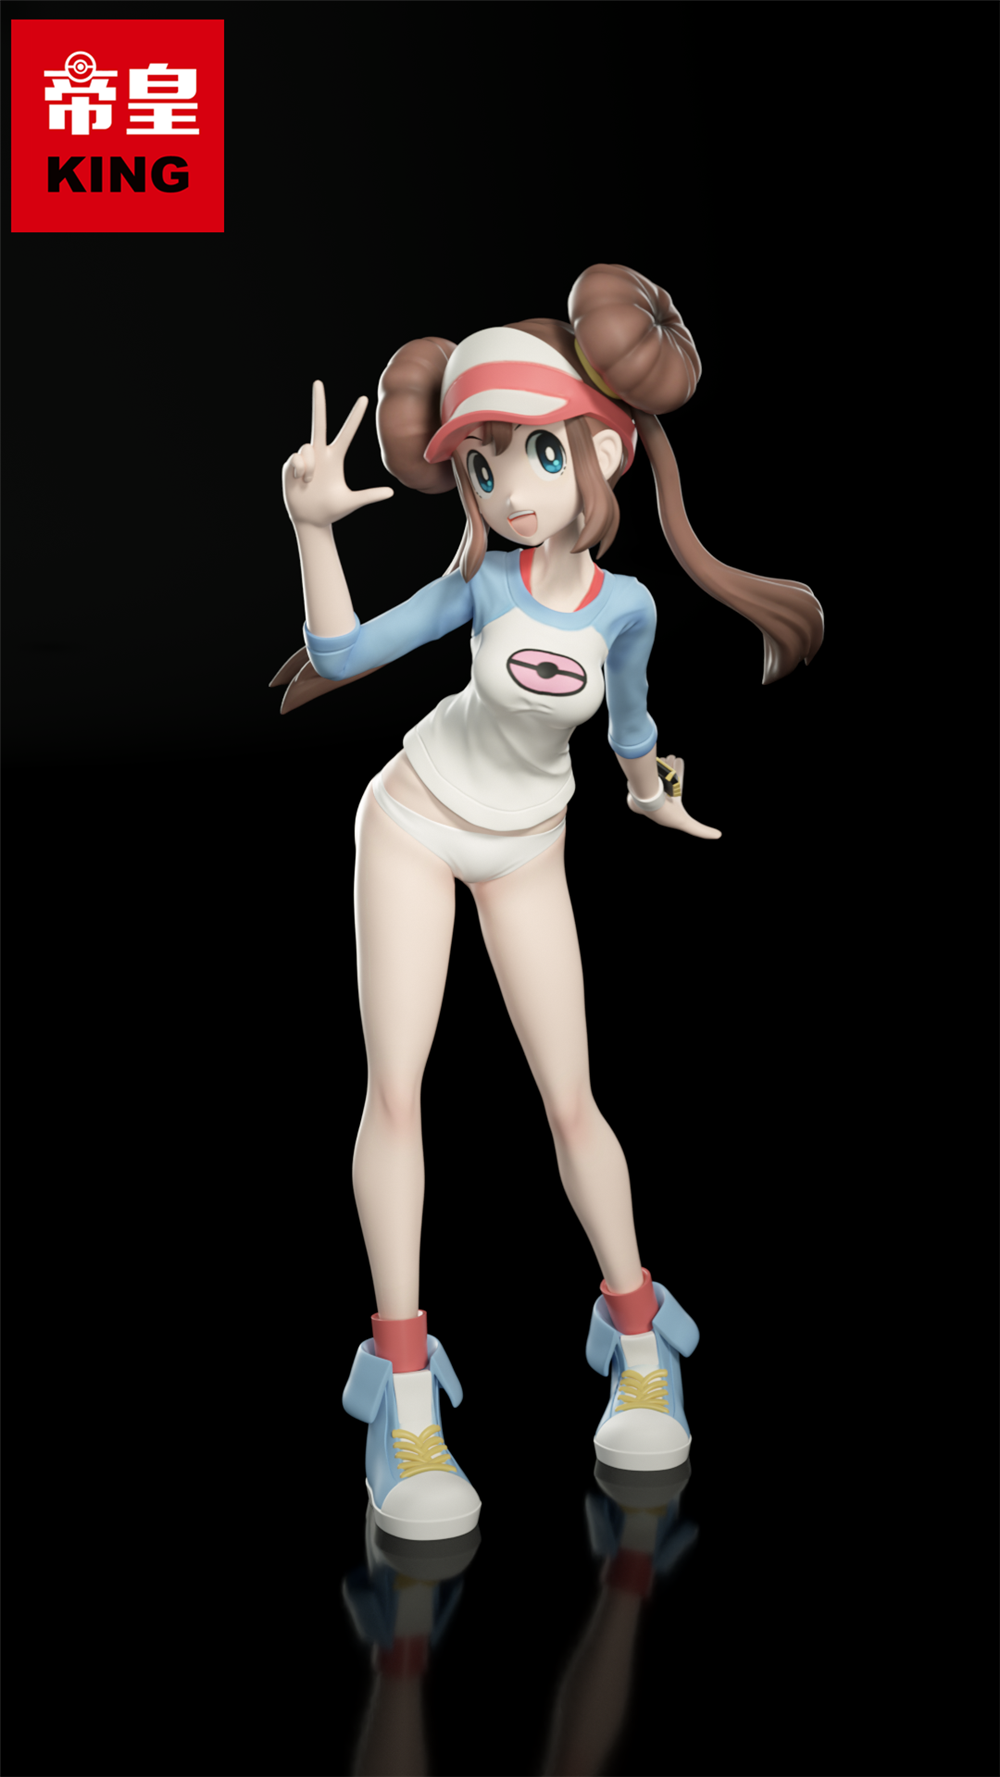 〖Sold Out〗Pokemon Scale World Rosa 1:20 - King Studio